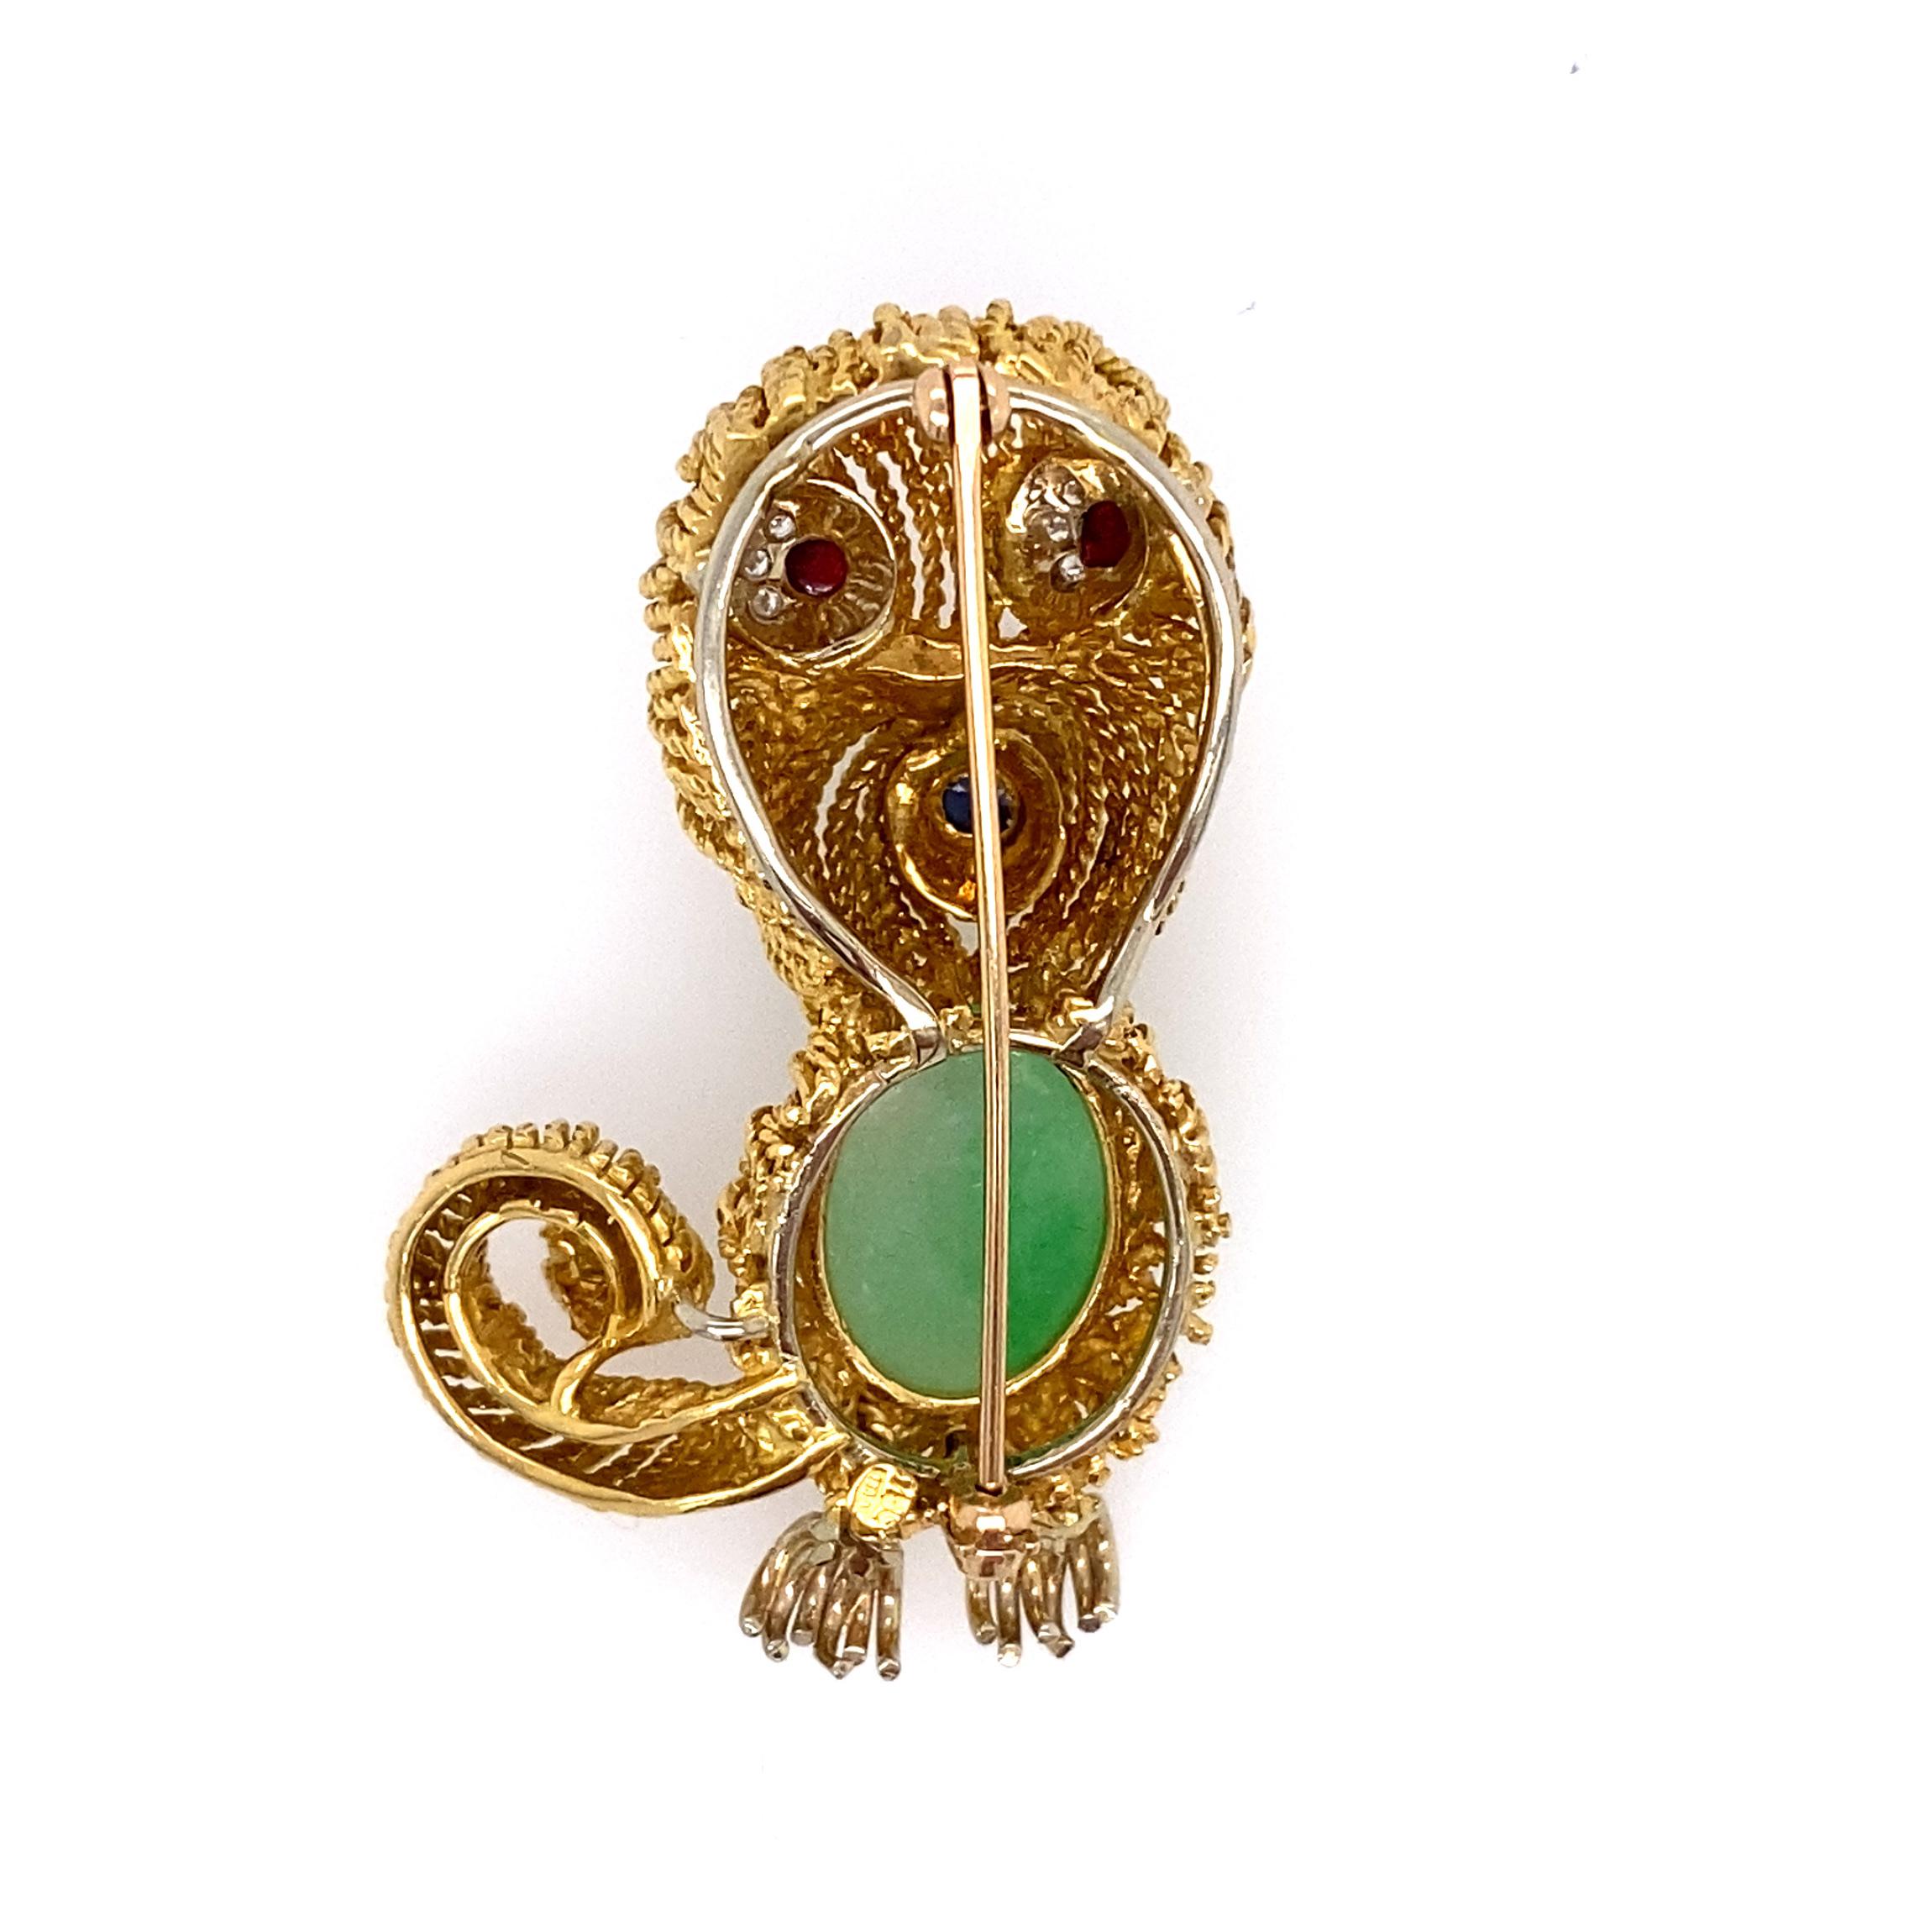 18k Gold and Jade Squirrel Brooch 
It has eyes that are cabochon ruby an diamond and nose that is cabochon sapphire. 
Jade measurements is 11.68 mm x 15.46 mm 
Brooch measurements Length from the tale 1.13 inches x 1.58 inches 
Length  from head is